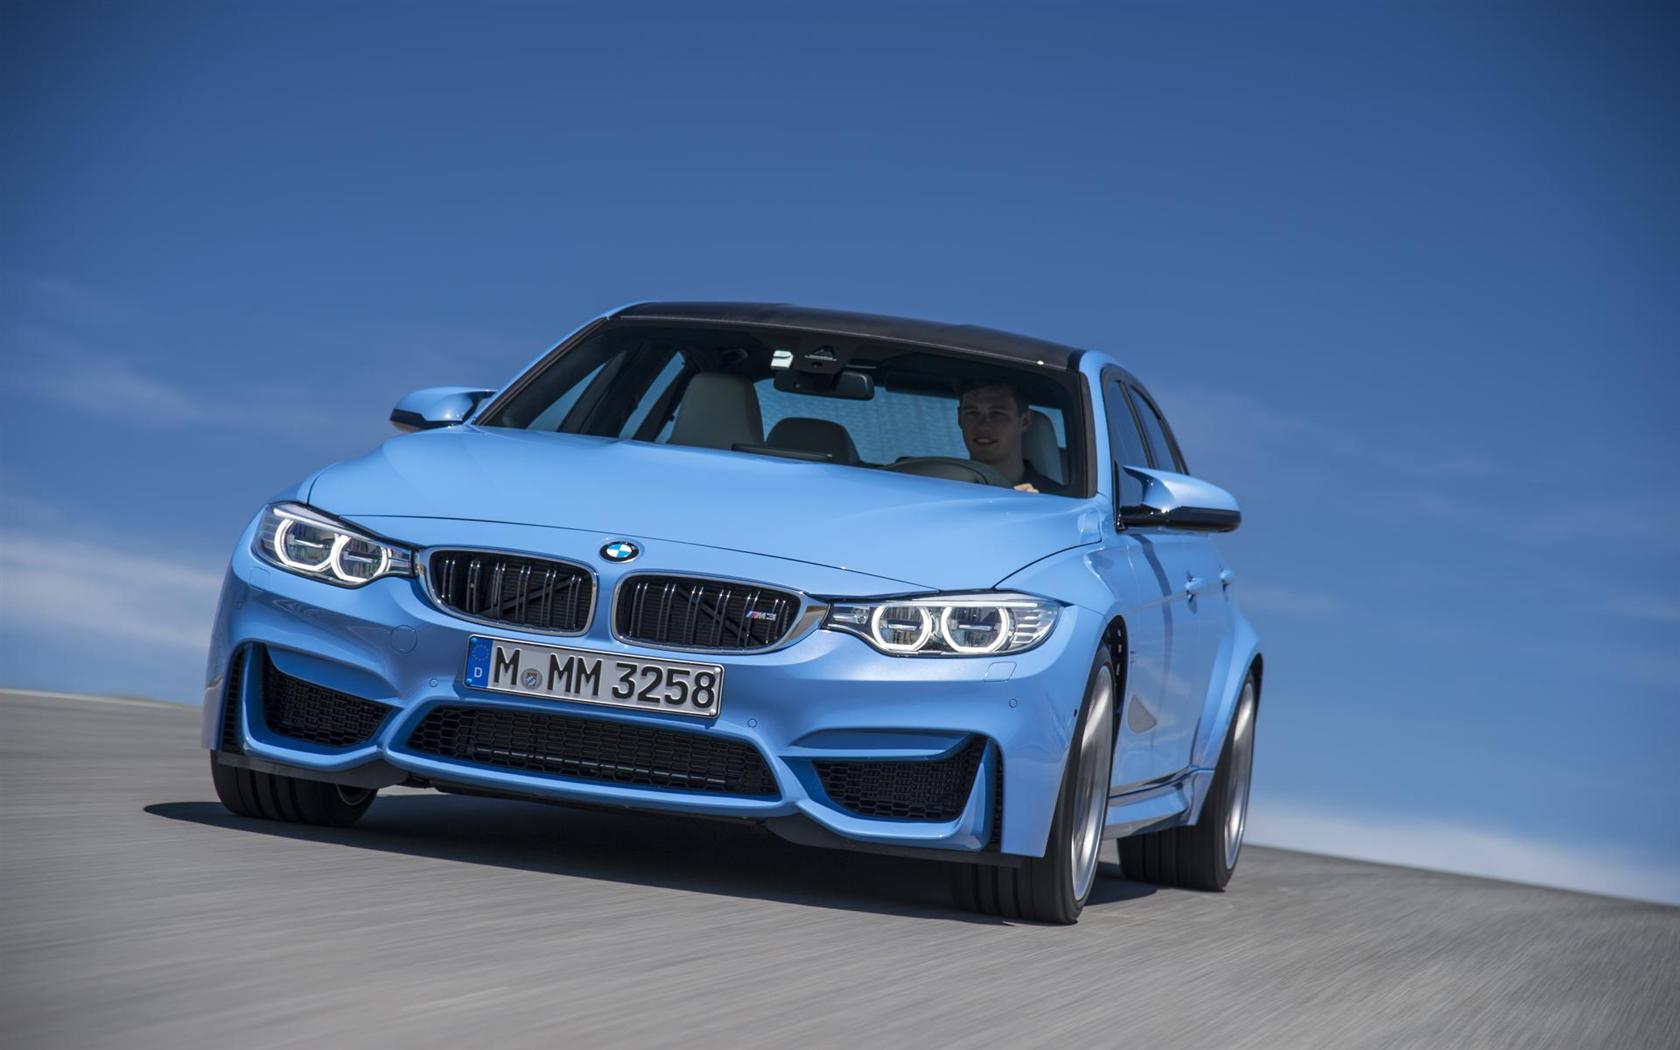 A Luxurious Driving Experience: The 2015 BMW M3 Sedan